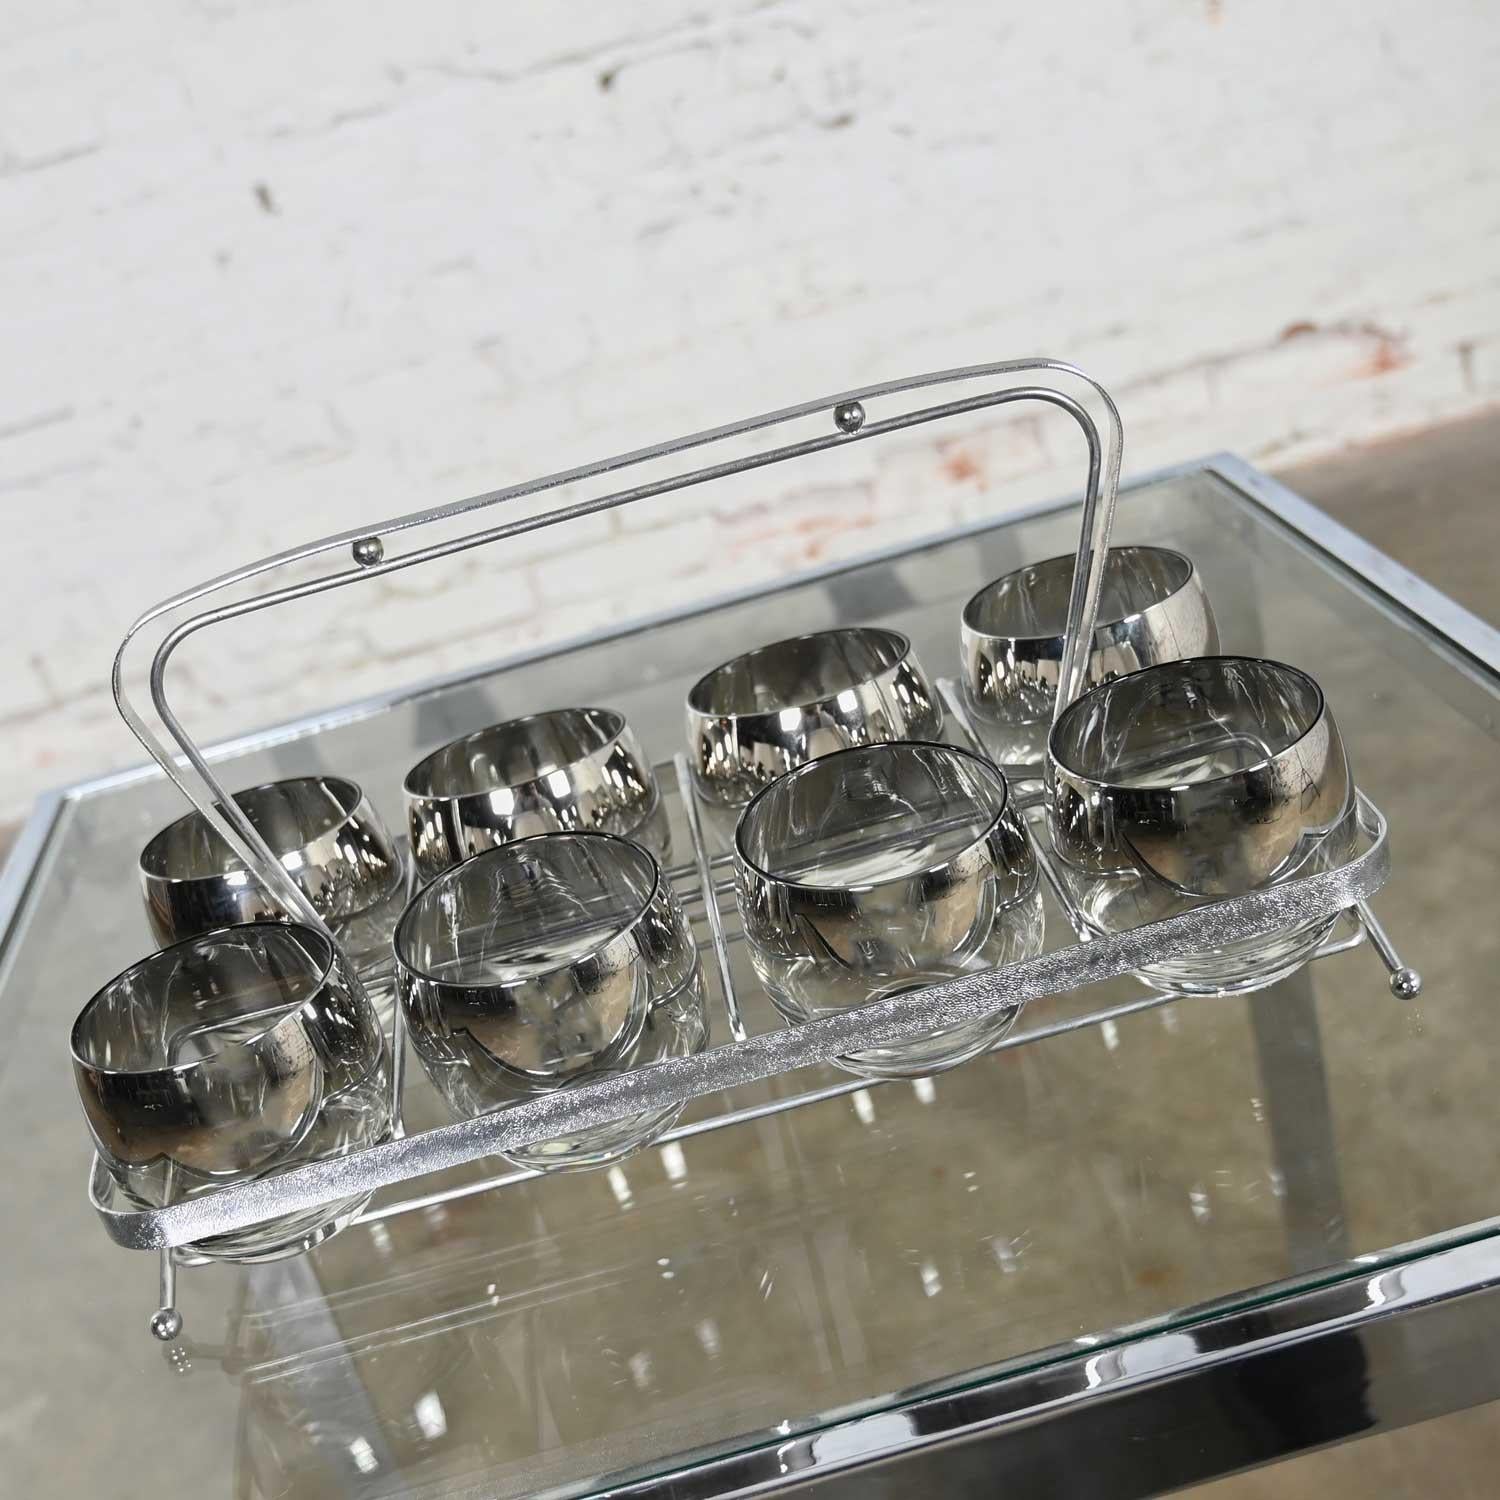 Just WOW! What a gorgeous chrome caddy filled with EIGHT stunning roly poly silver rimmed cocktail glasses!! What a sophisticated set of glassware to impress your guests! The chrome carrier is ADORABLE! It is chrome with wonderful chrome sphere feet